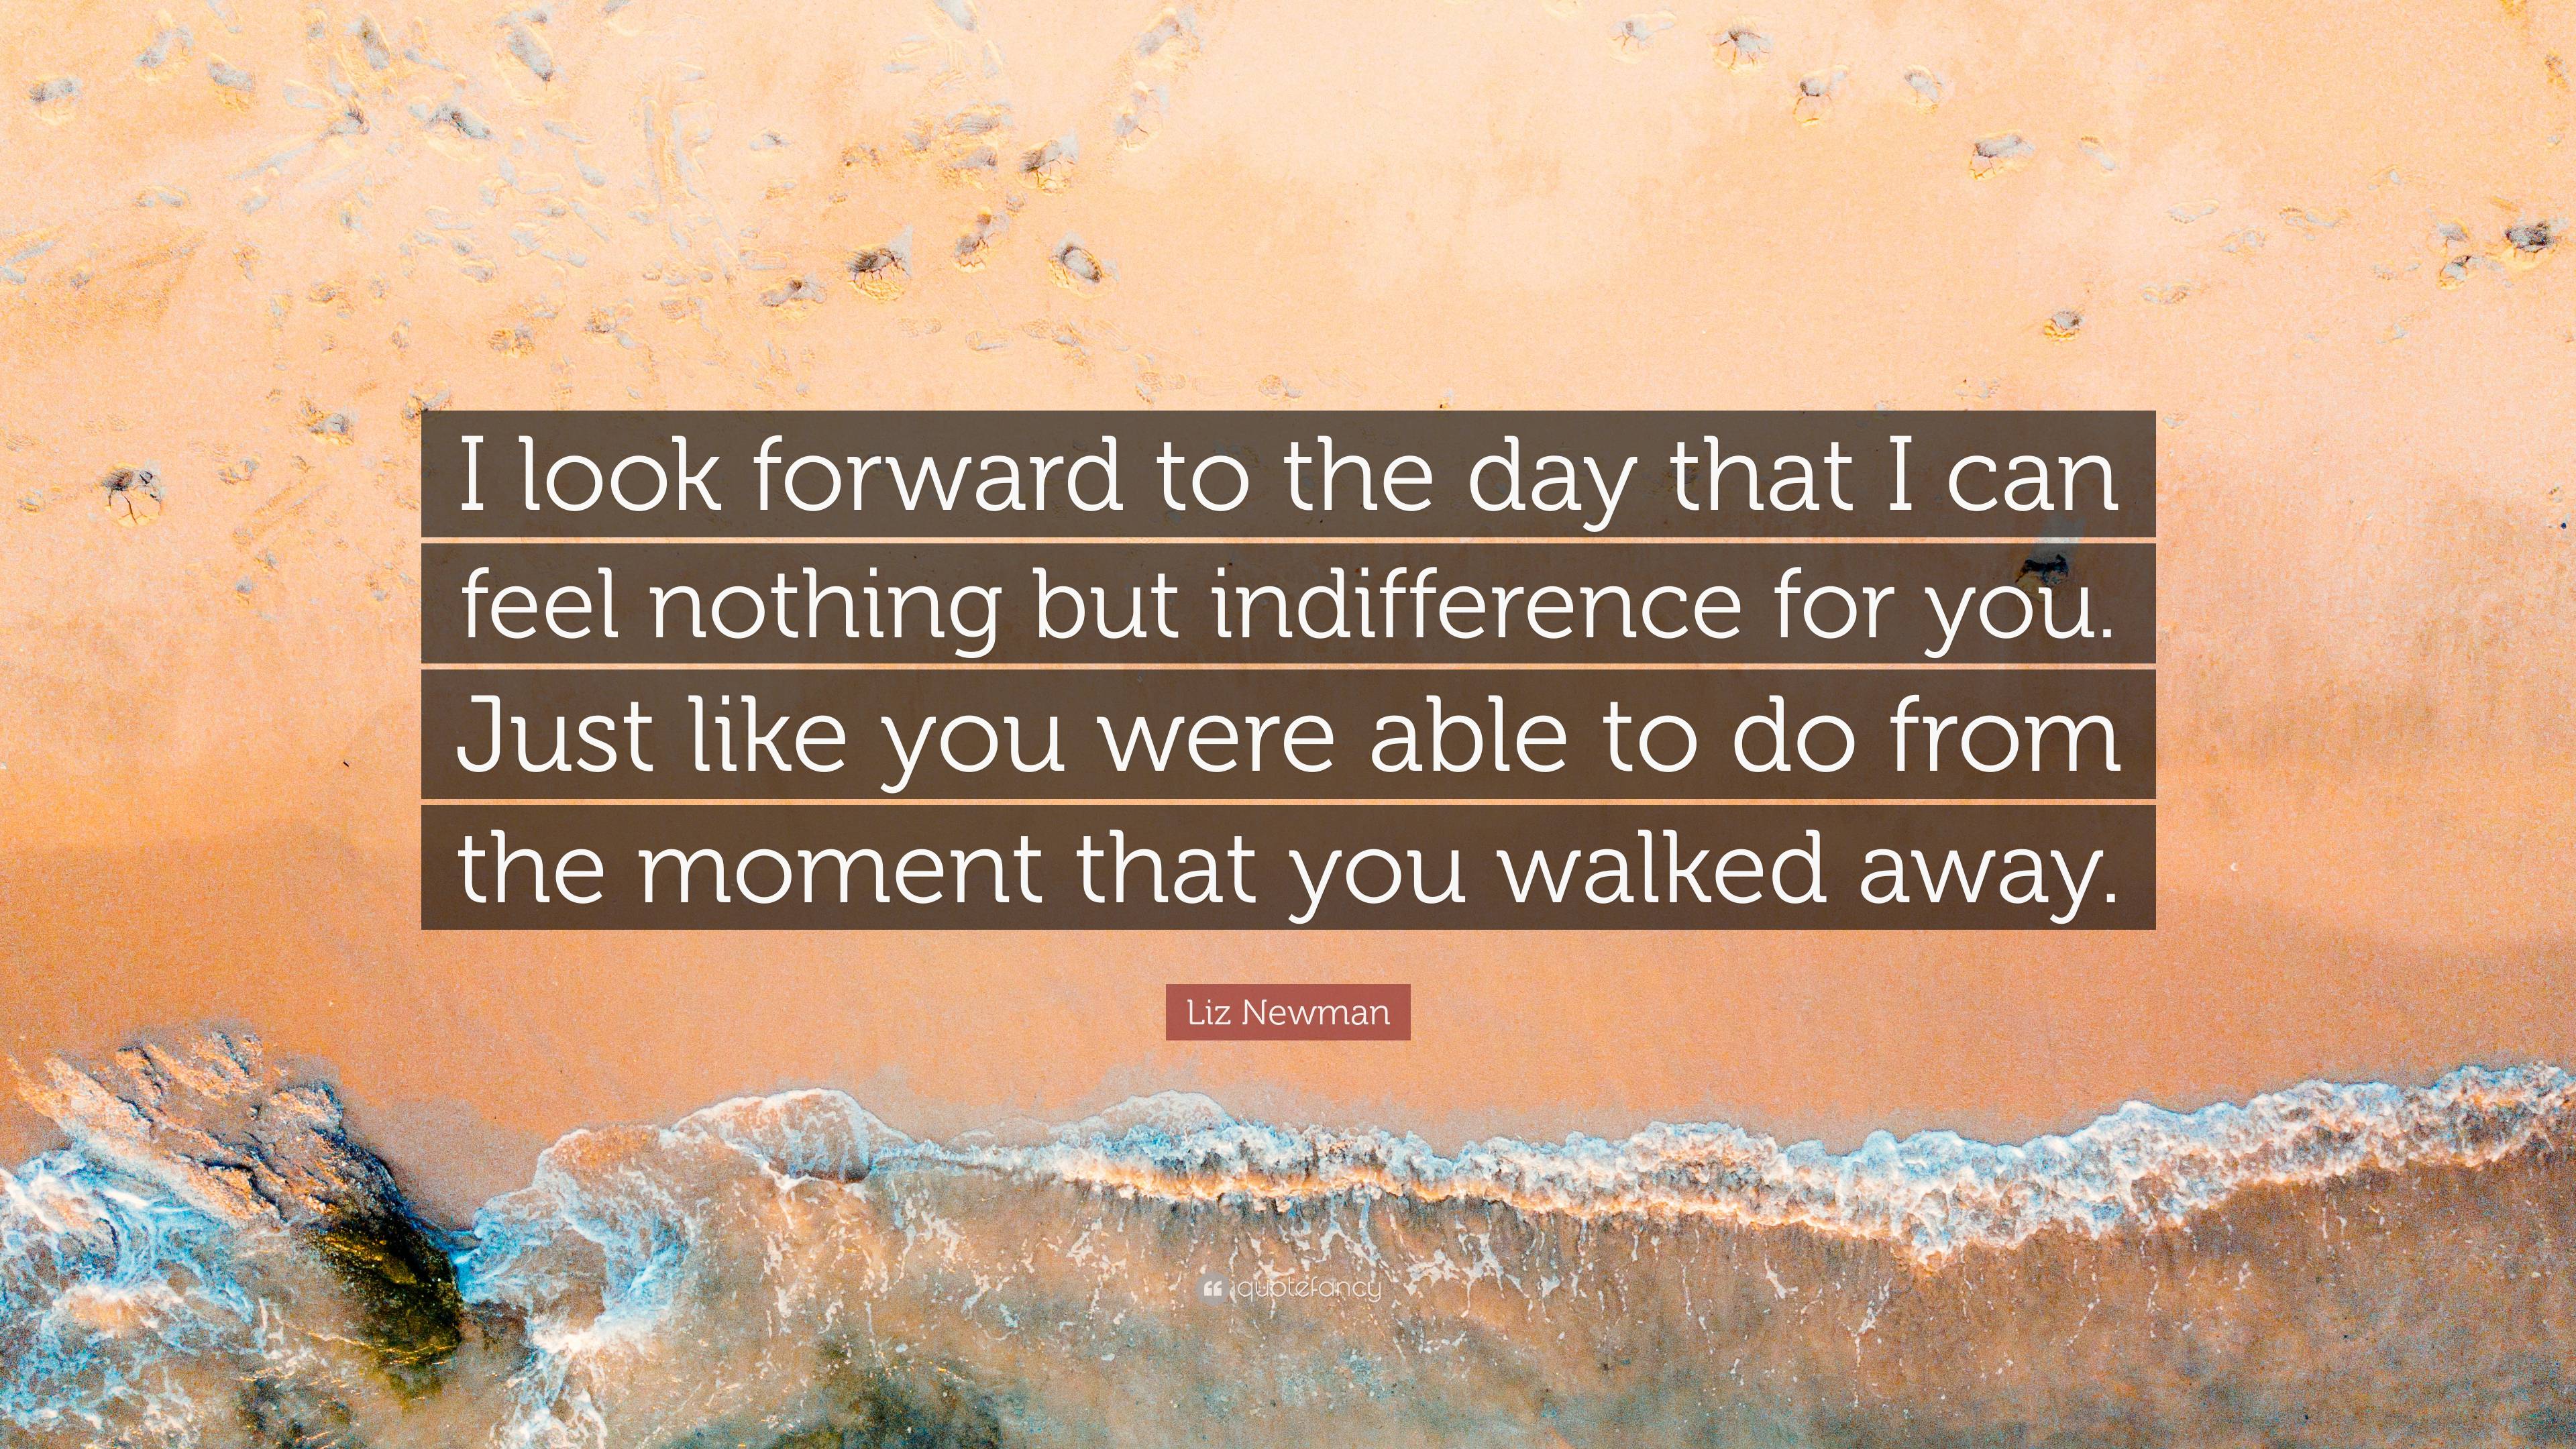 Liz Newman Quote: “I look forward to the day that I can feel nothing ...